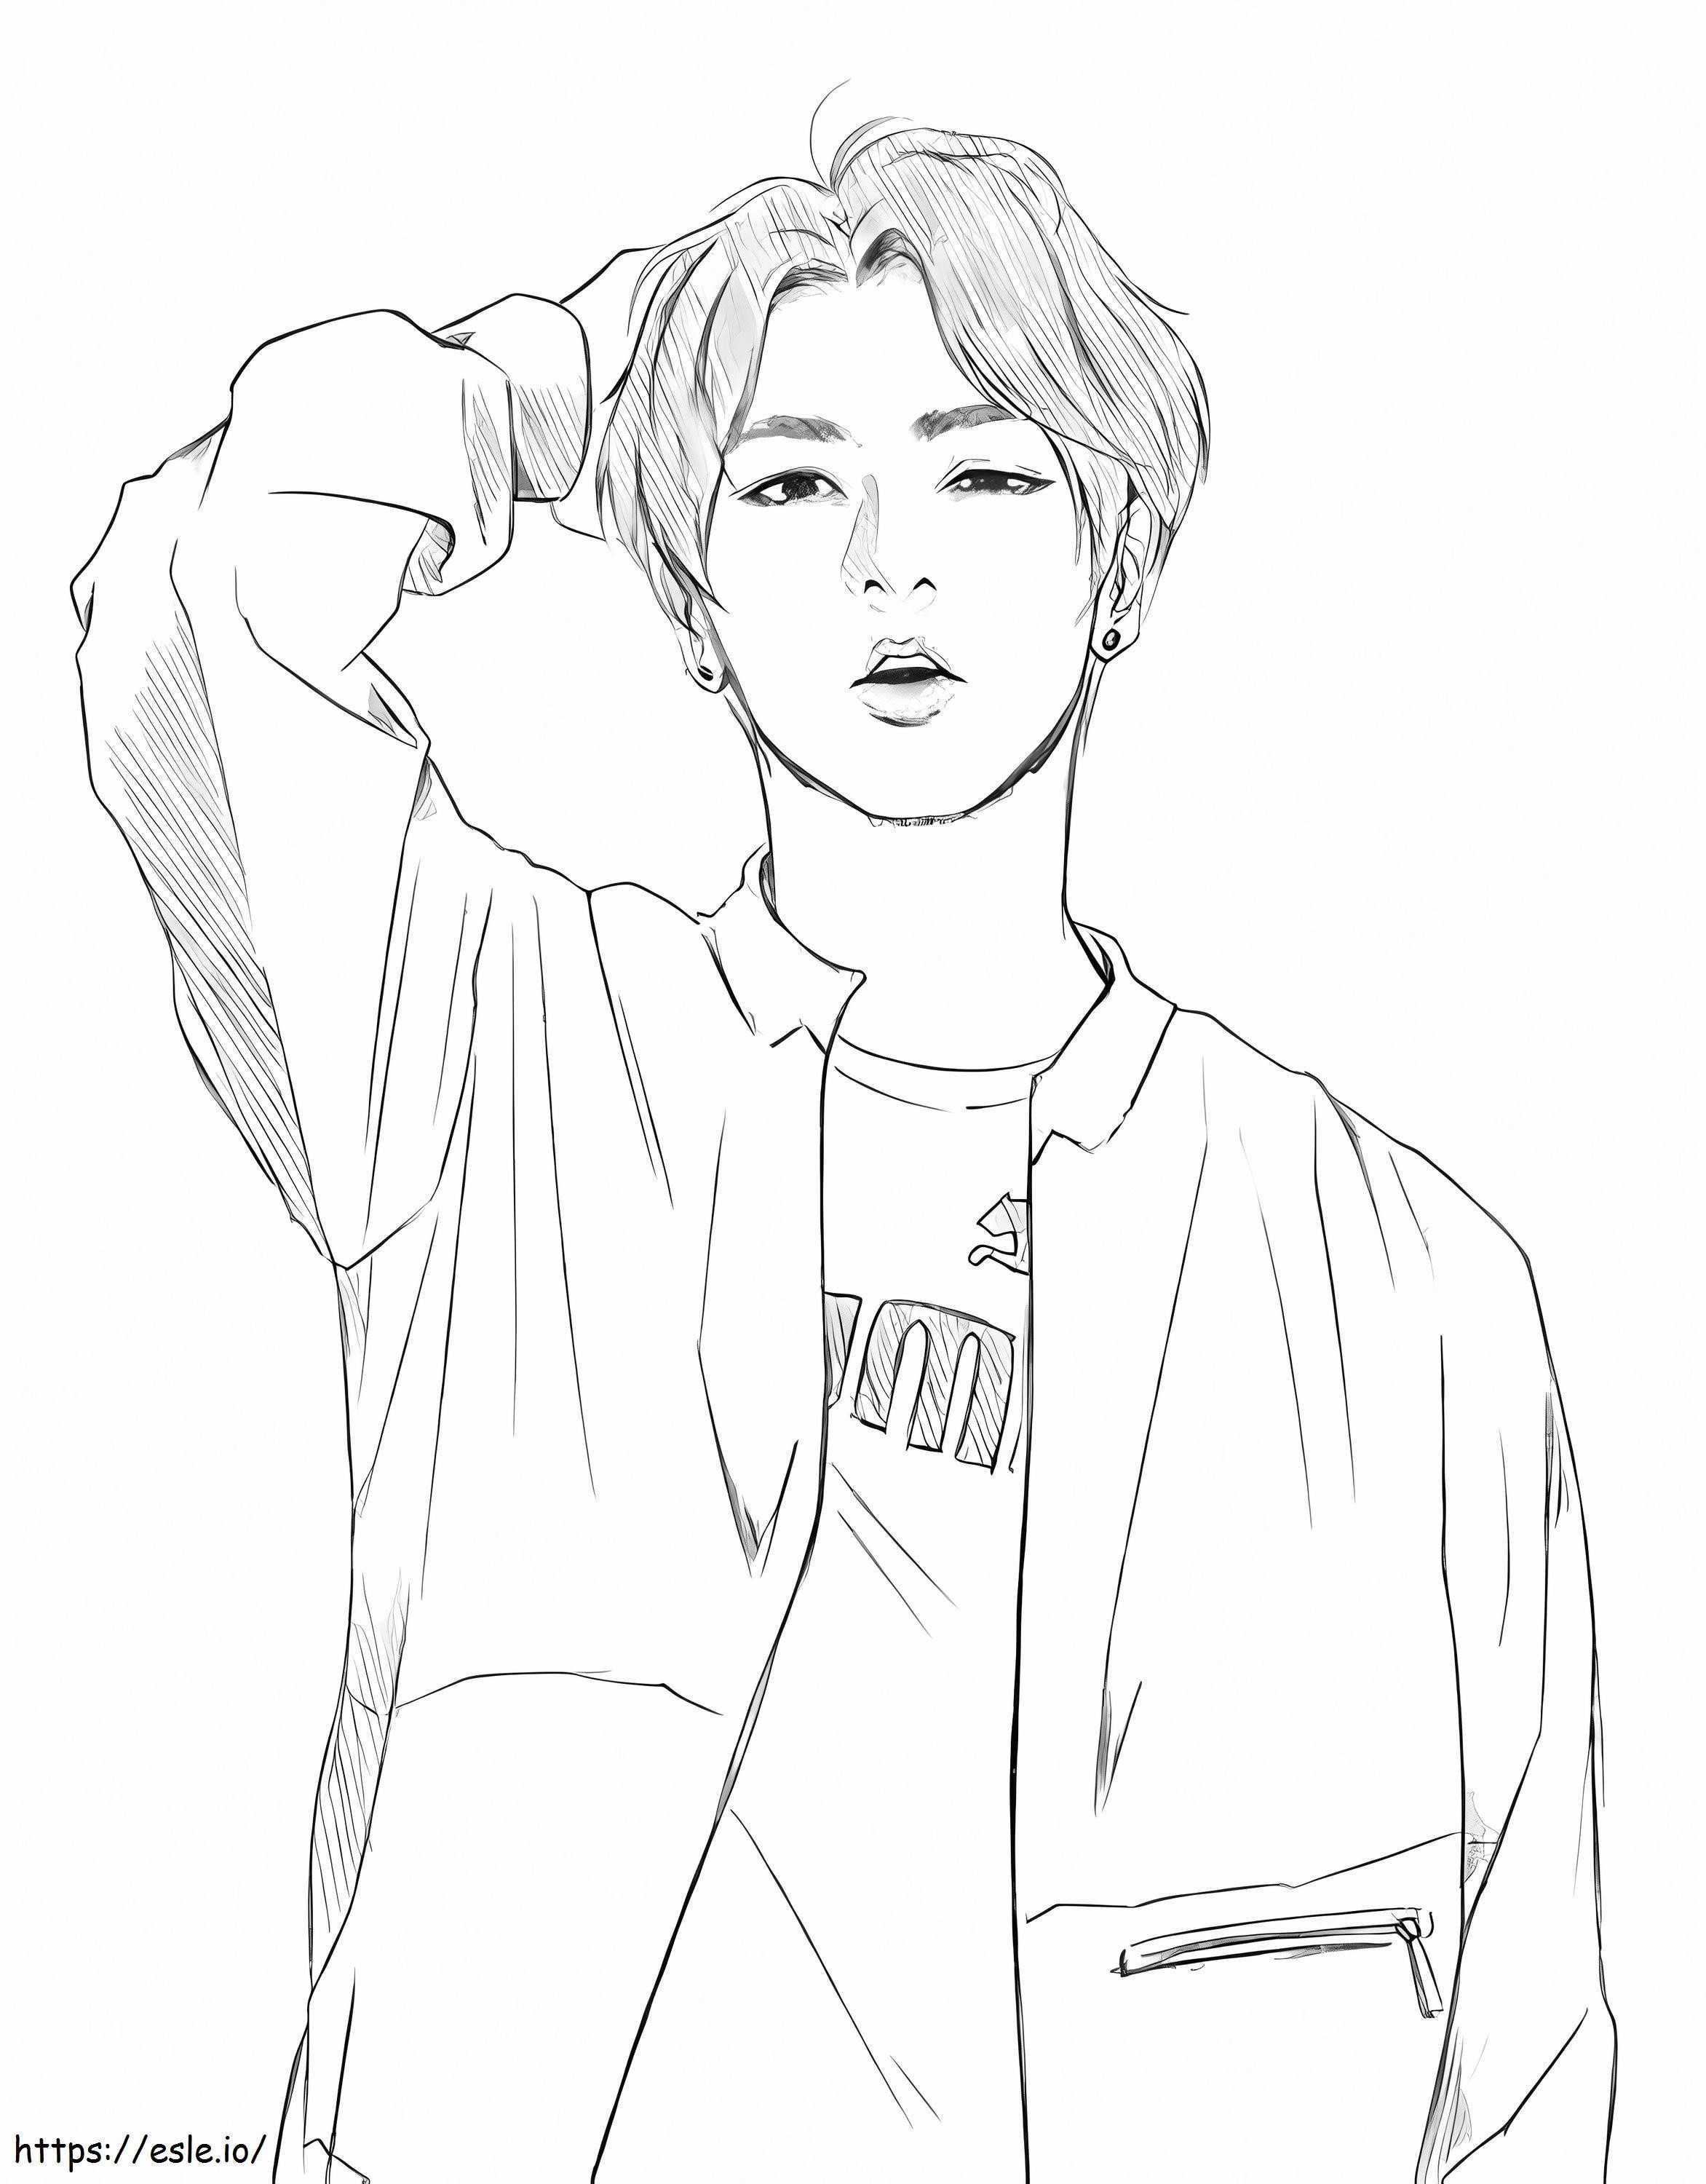 Jimin From BTS coloring page